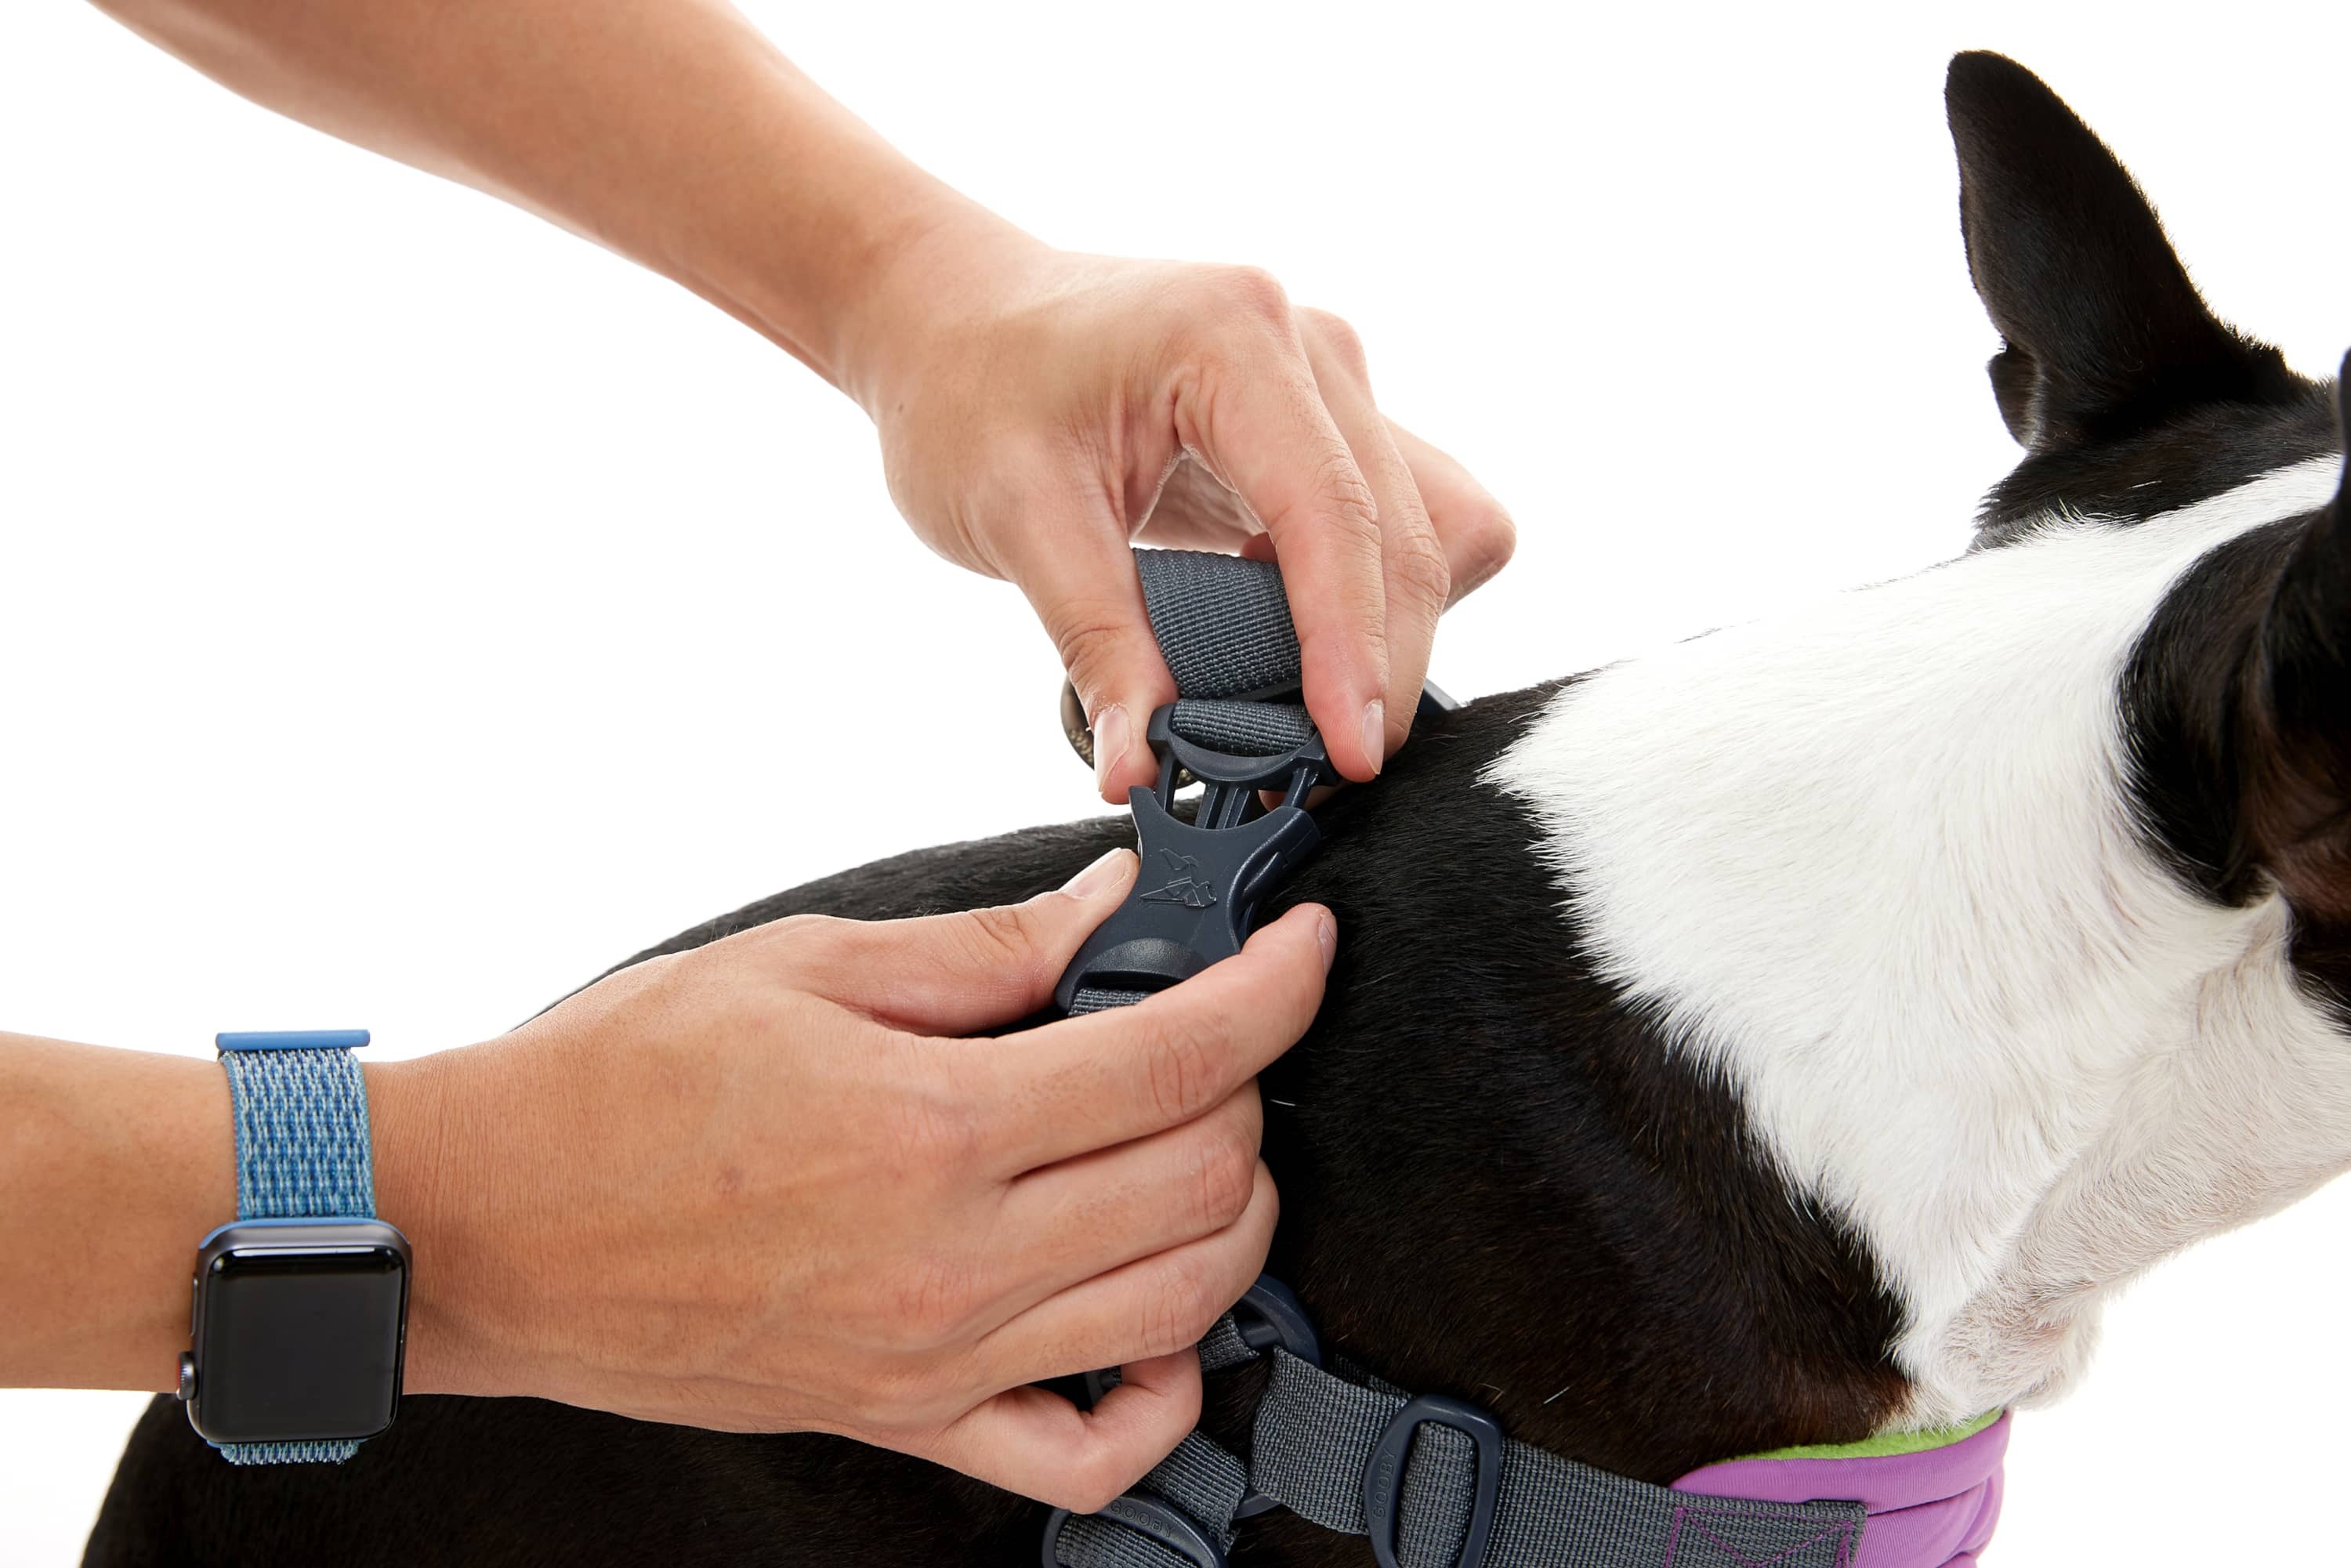 How To Put On A Dog Harness - STEP BY STEP 